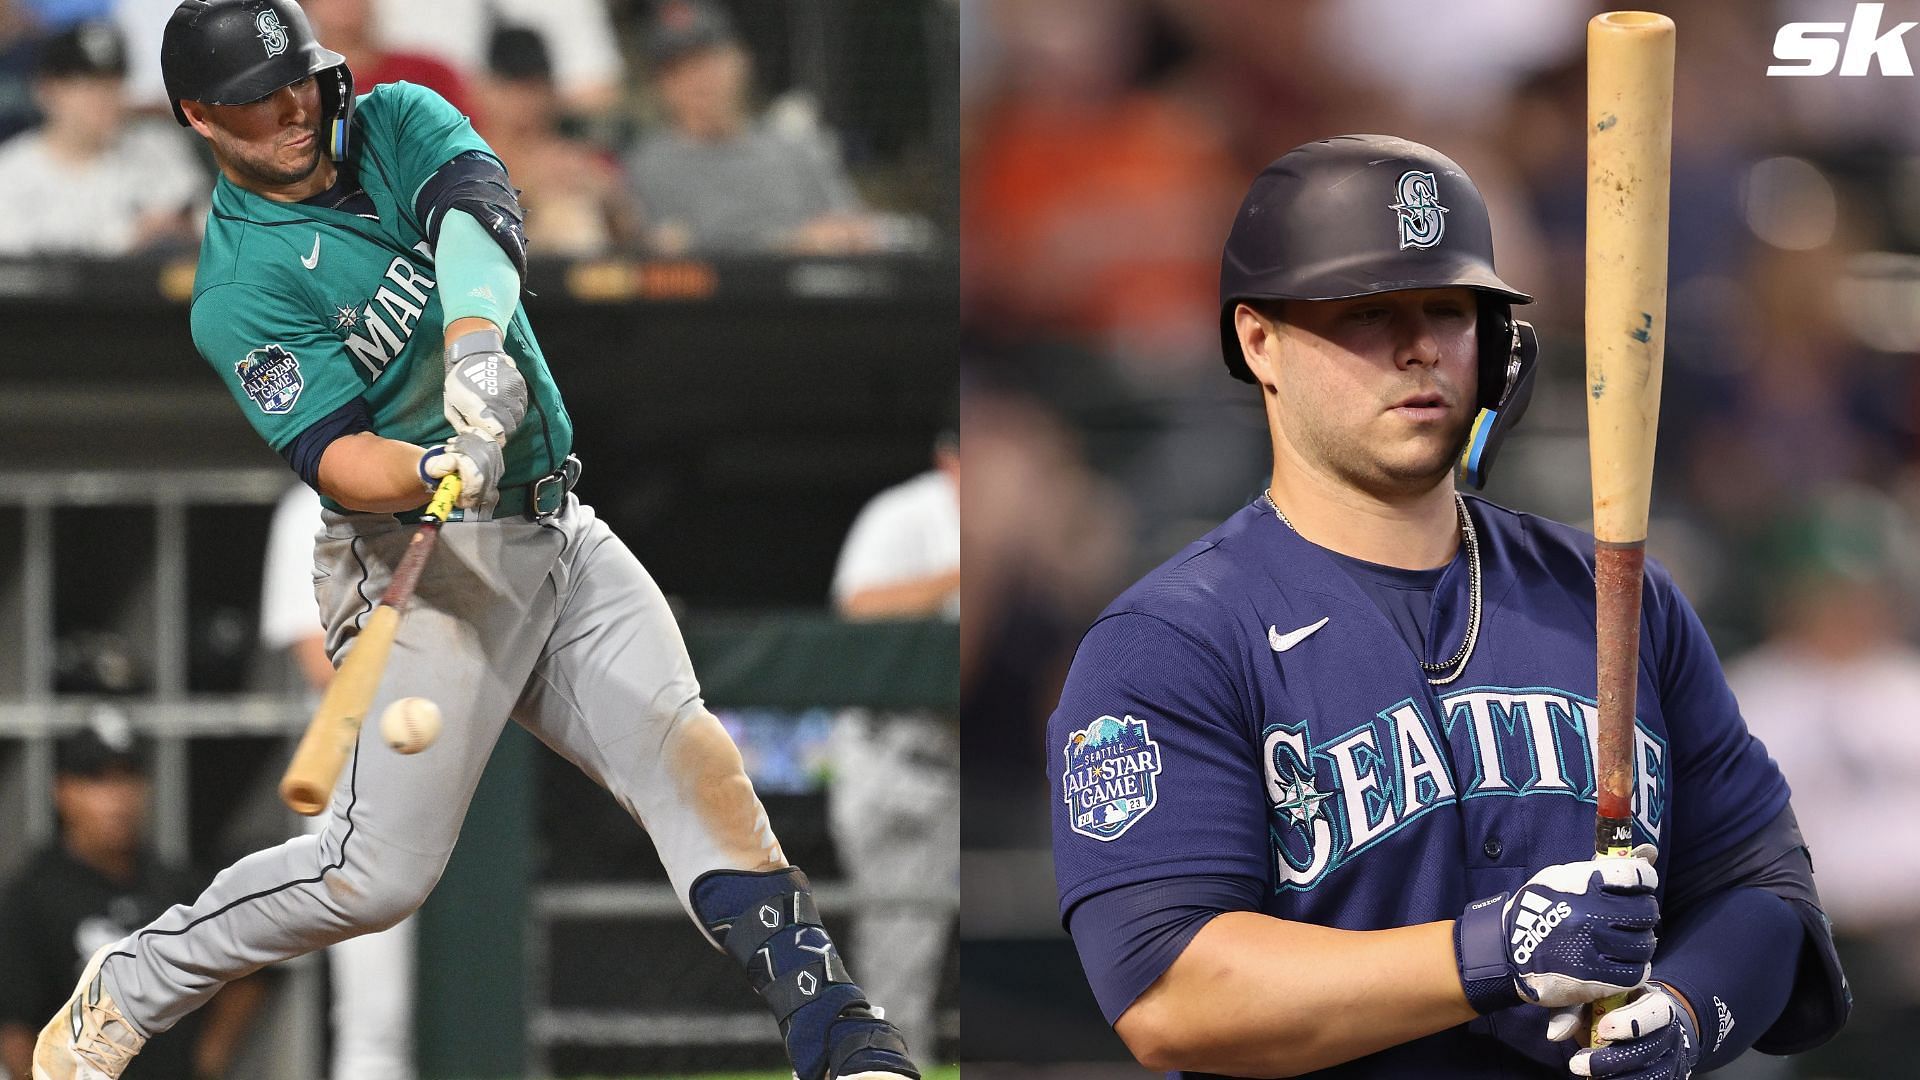 What happened to TY France? Mariners season under threat after